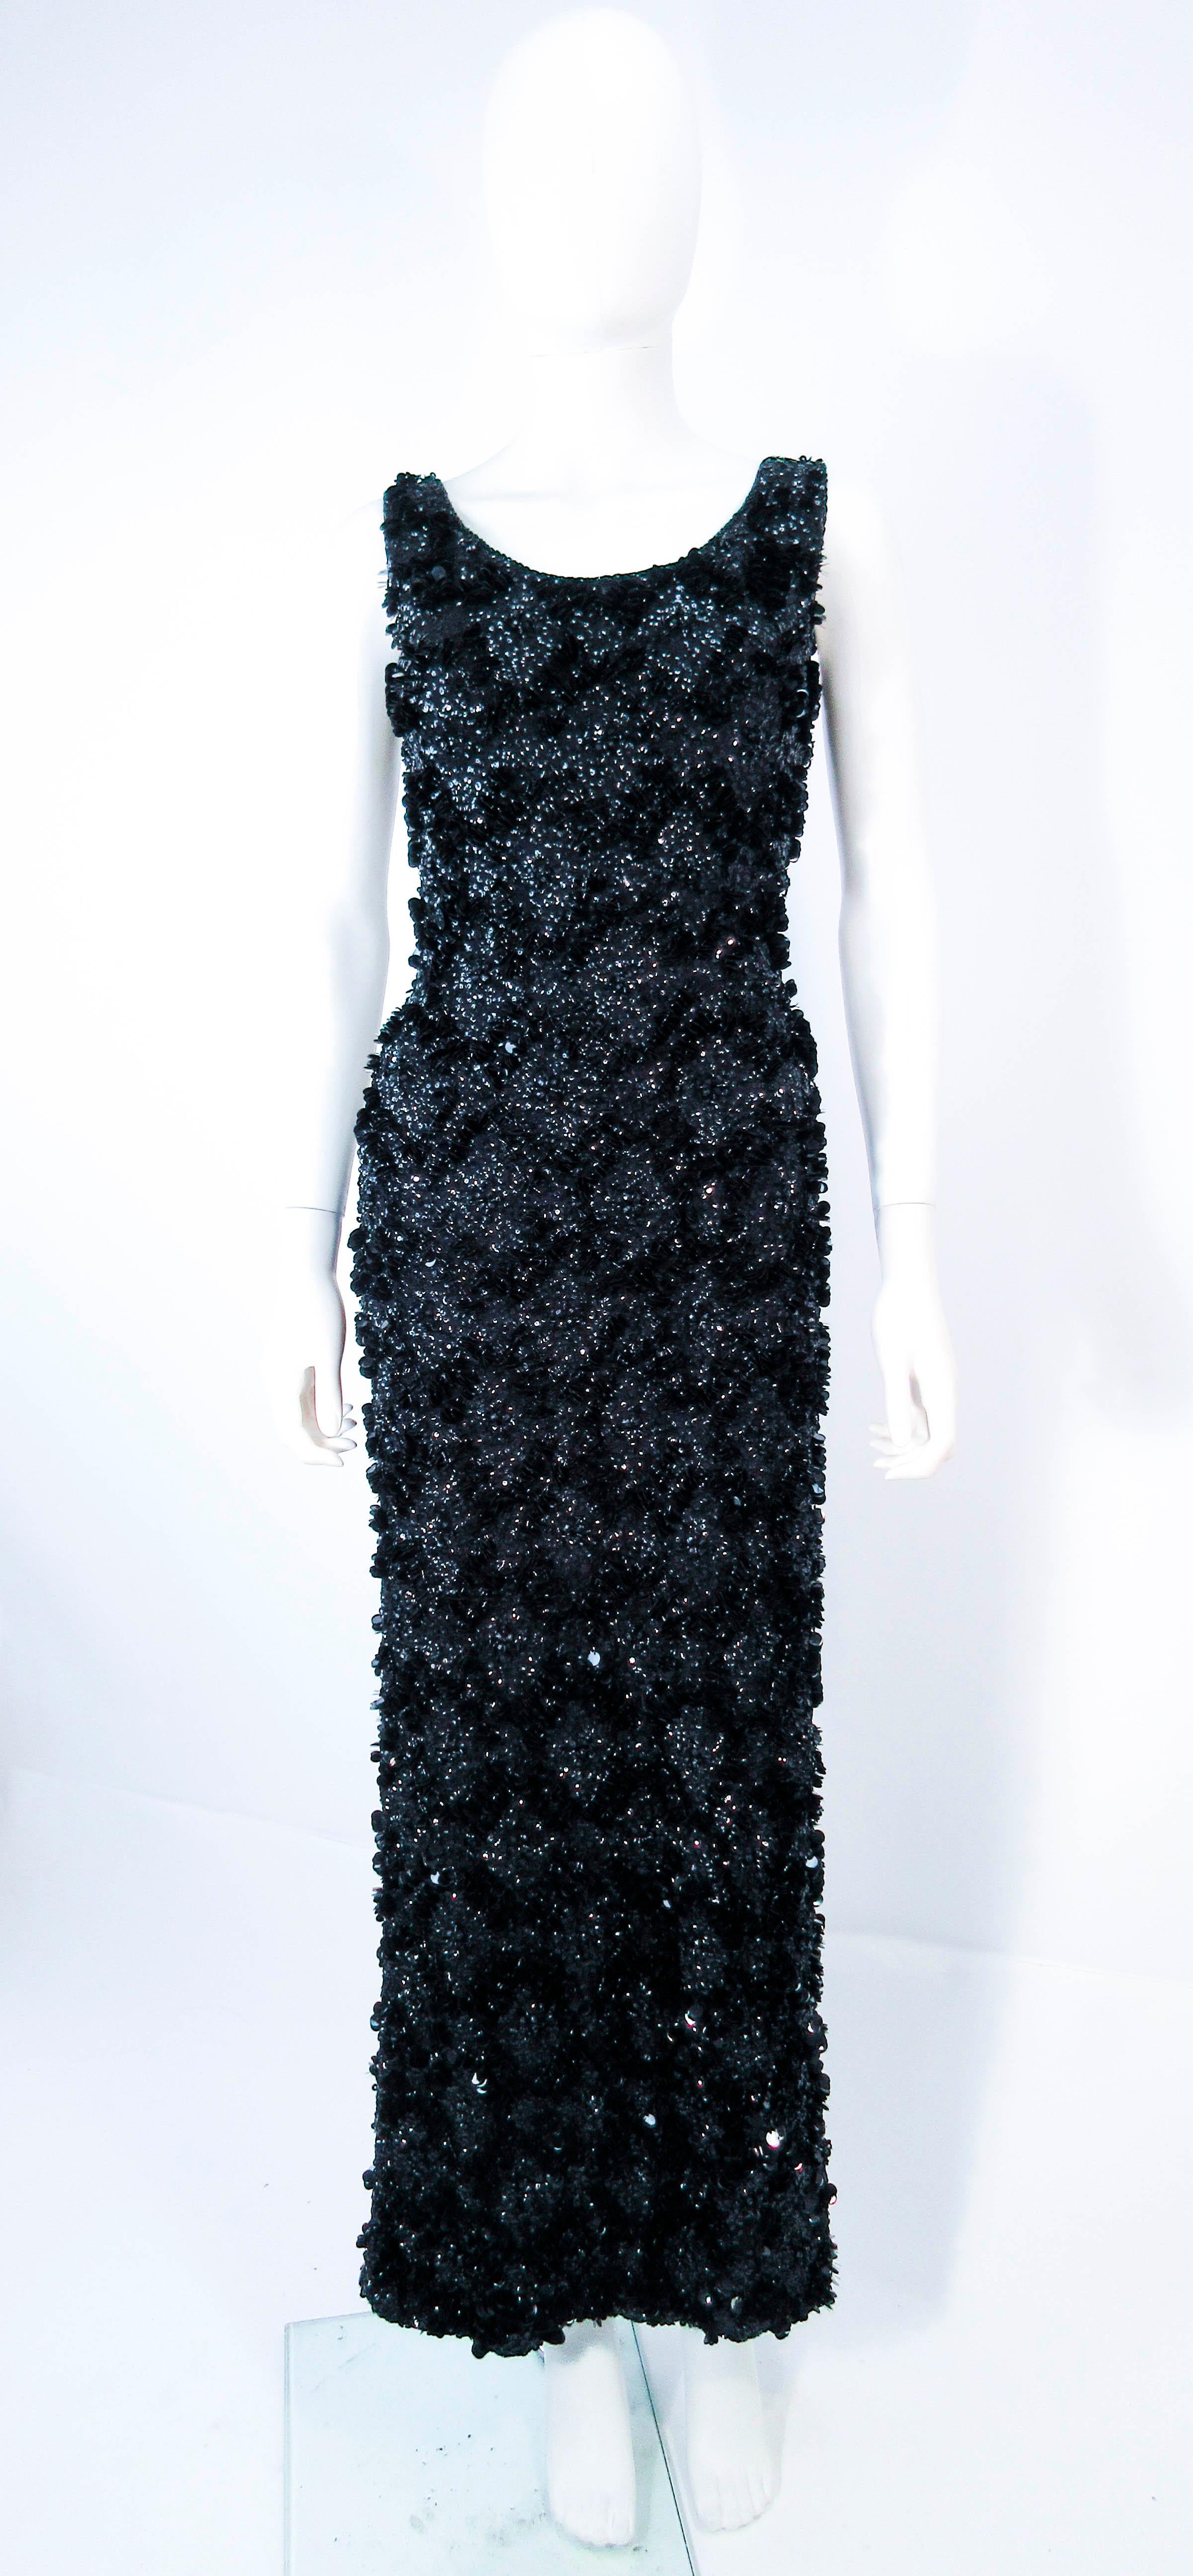 This Miss Ruth design is composed of a relief beaded & sequin black wool. Features a center back zipper closure, with scoop back style. Please feel free to ask us any additional questions you may have. 

 Measurements
Length: 58